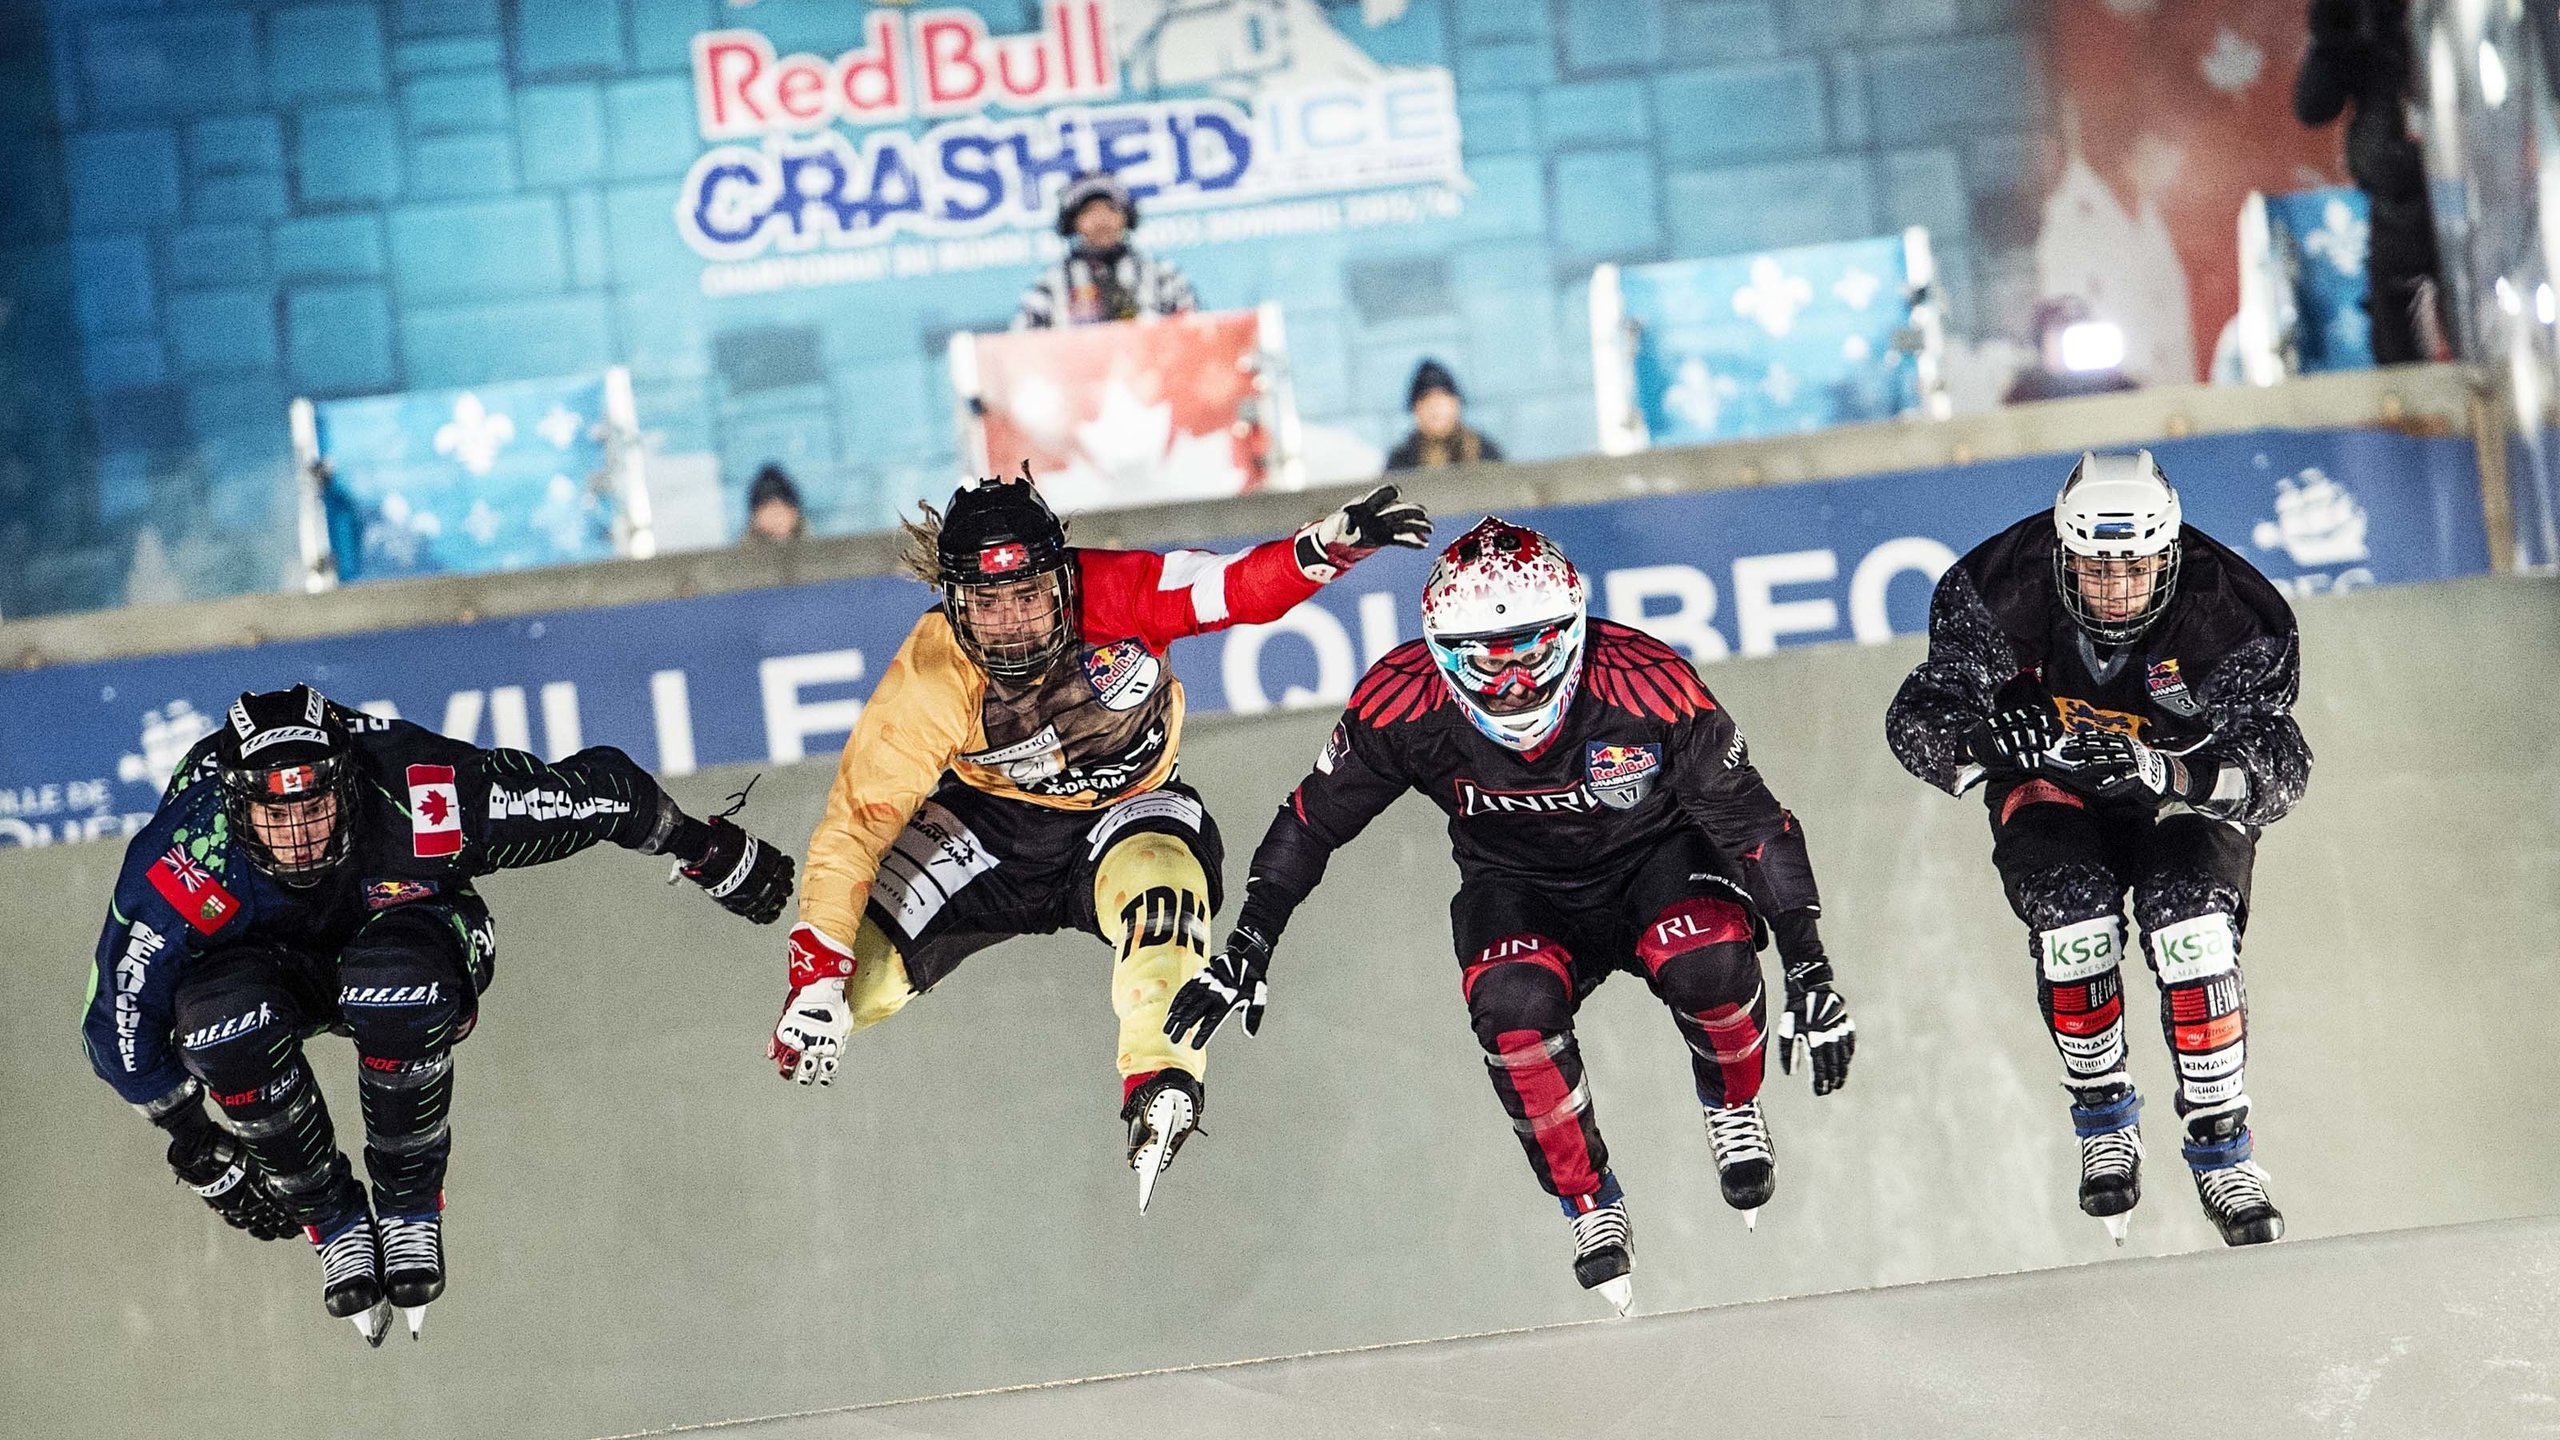 Red Bull crashed ice quebec 2016